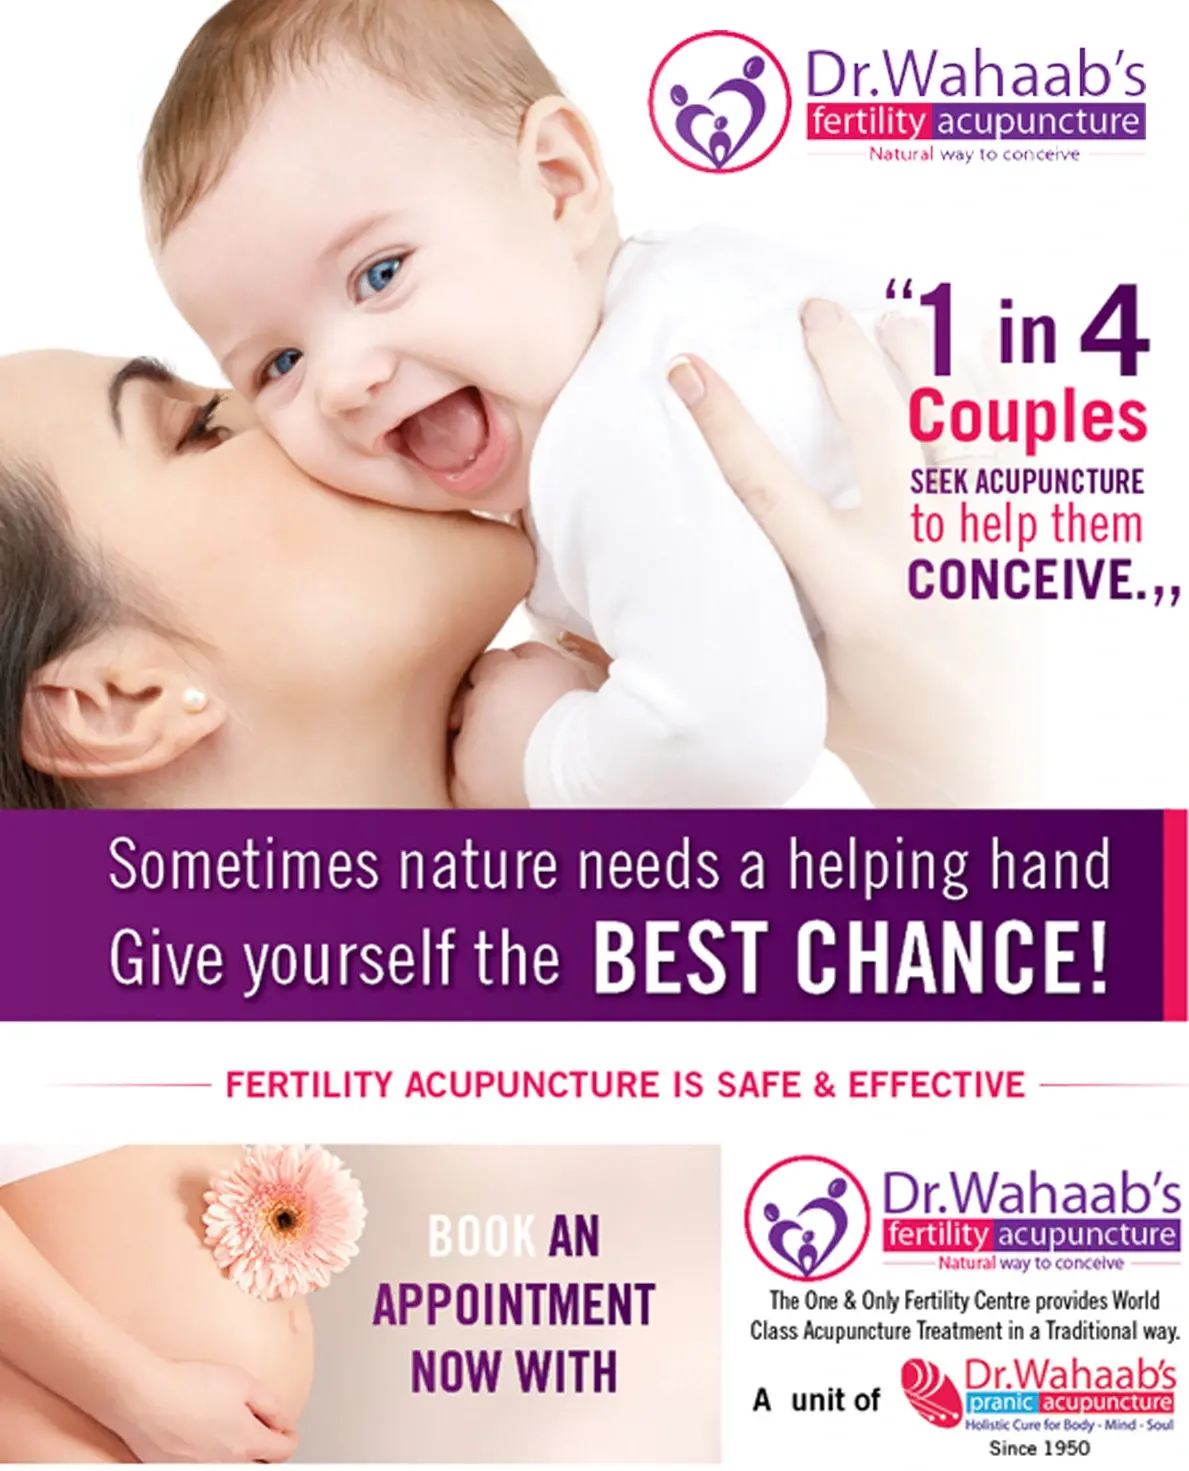 Dr. Wahaab's Pranic Acupuncture and Acupressure Clinic is one of the best acupuncture clinics in Adyar